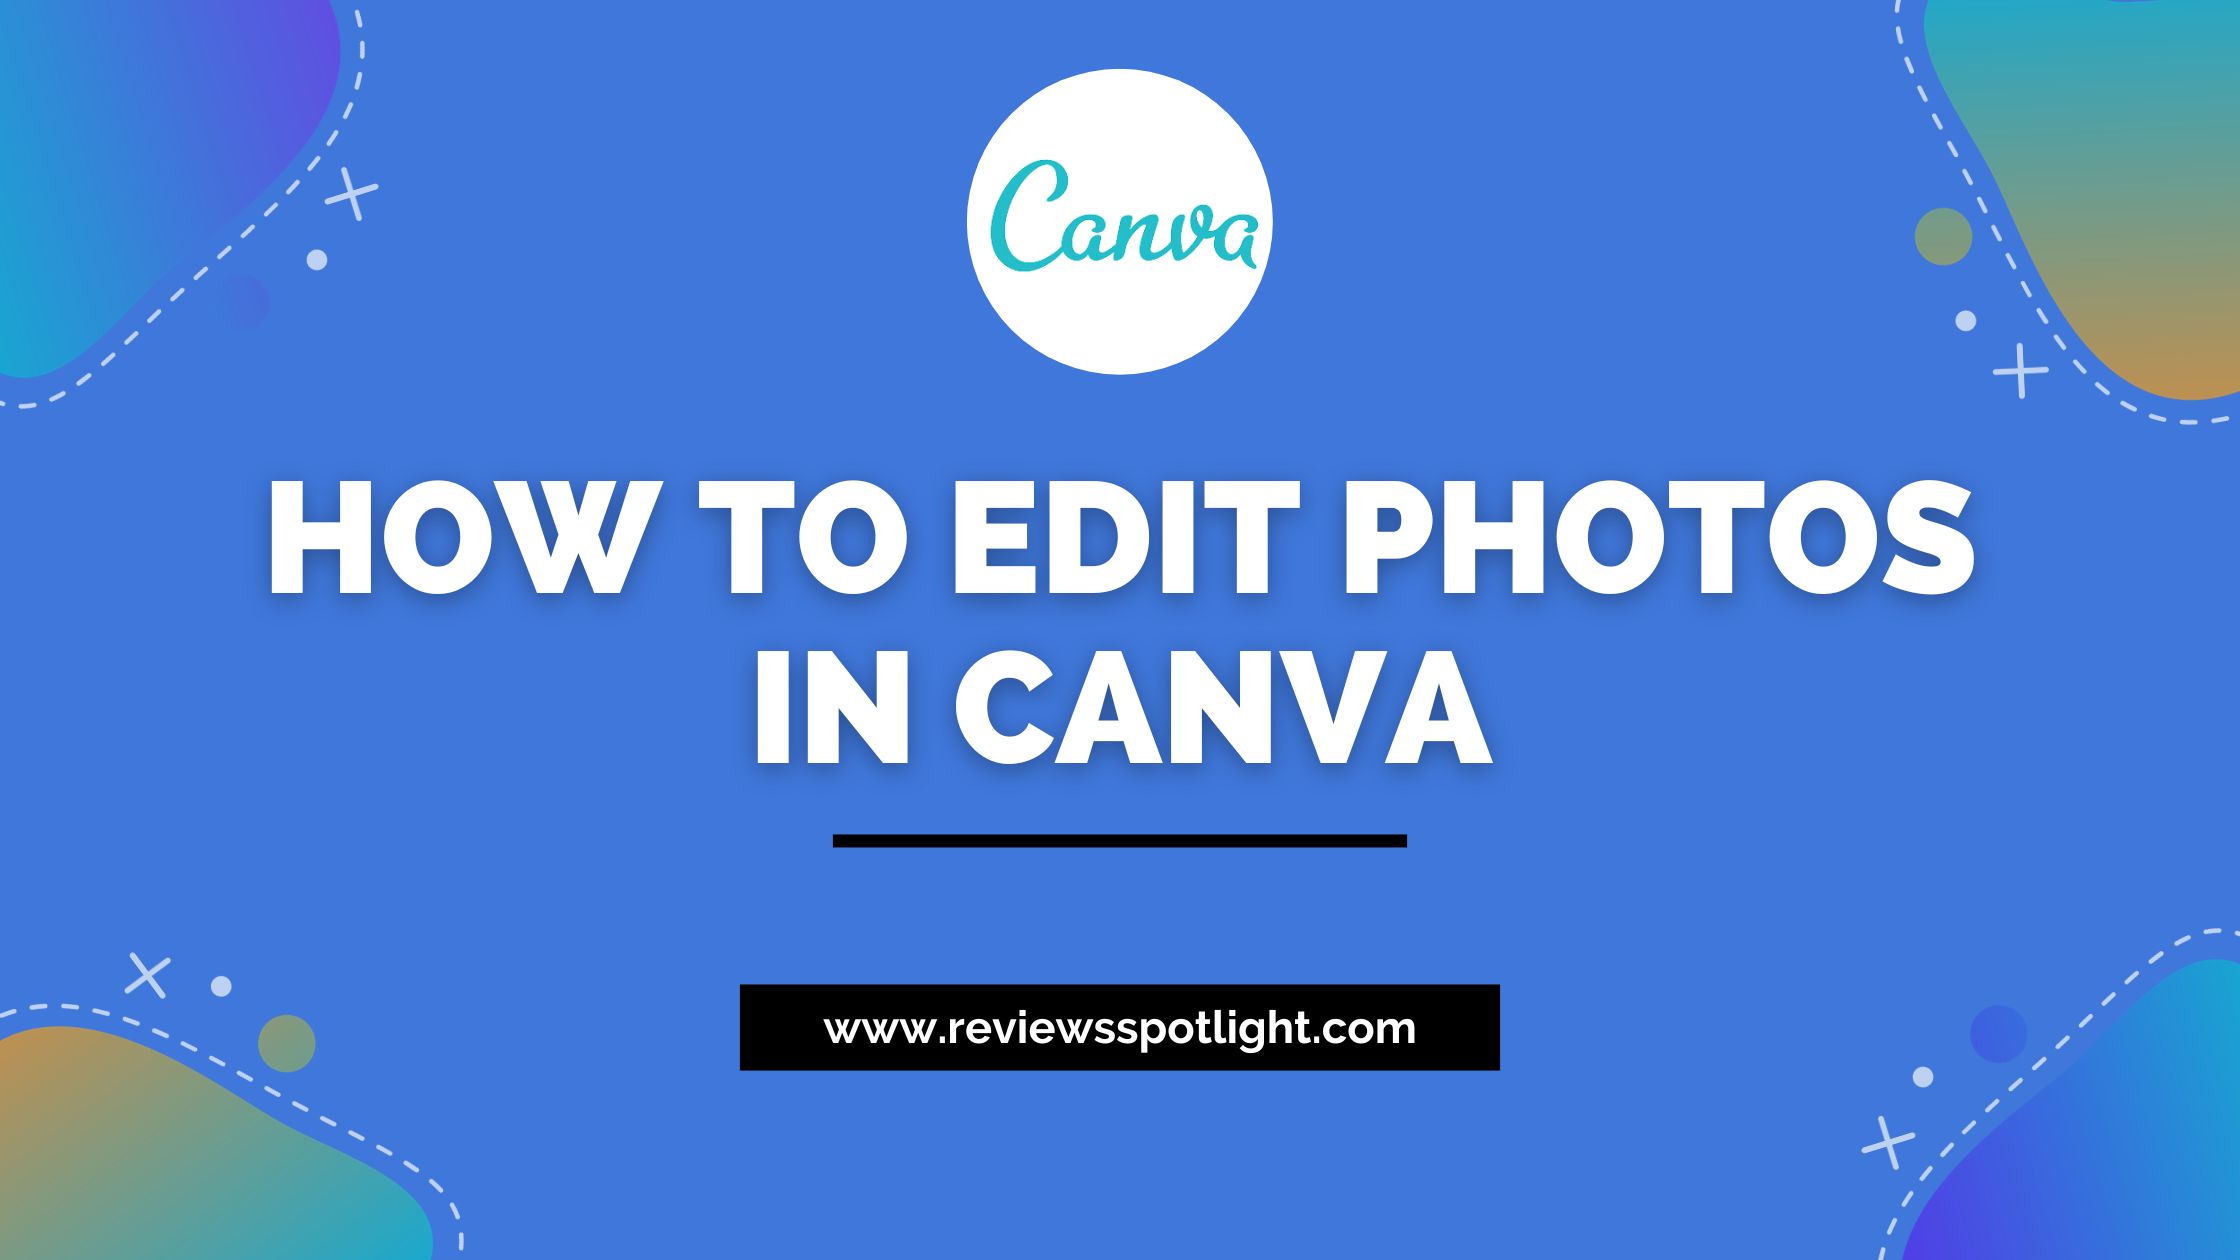 How to edit photos in Canva LIke a Pro